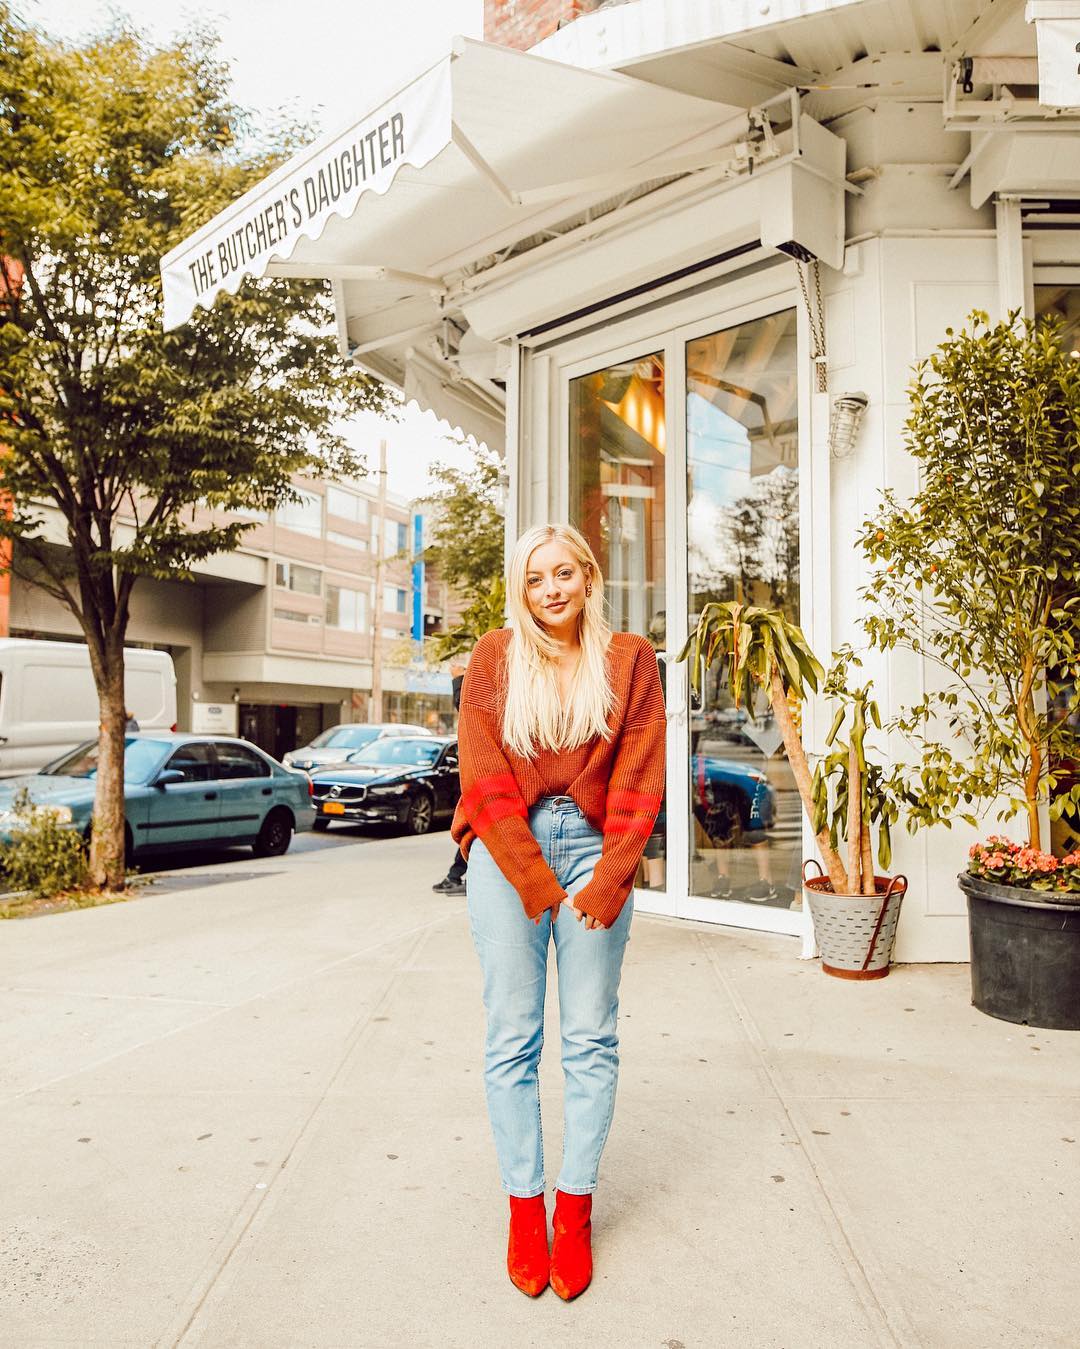 Fall Outfits Instagram Roundup #2 - Rach Martino